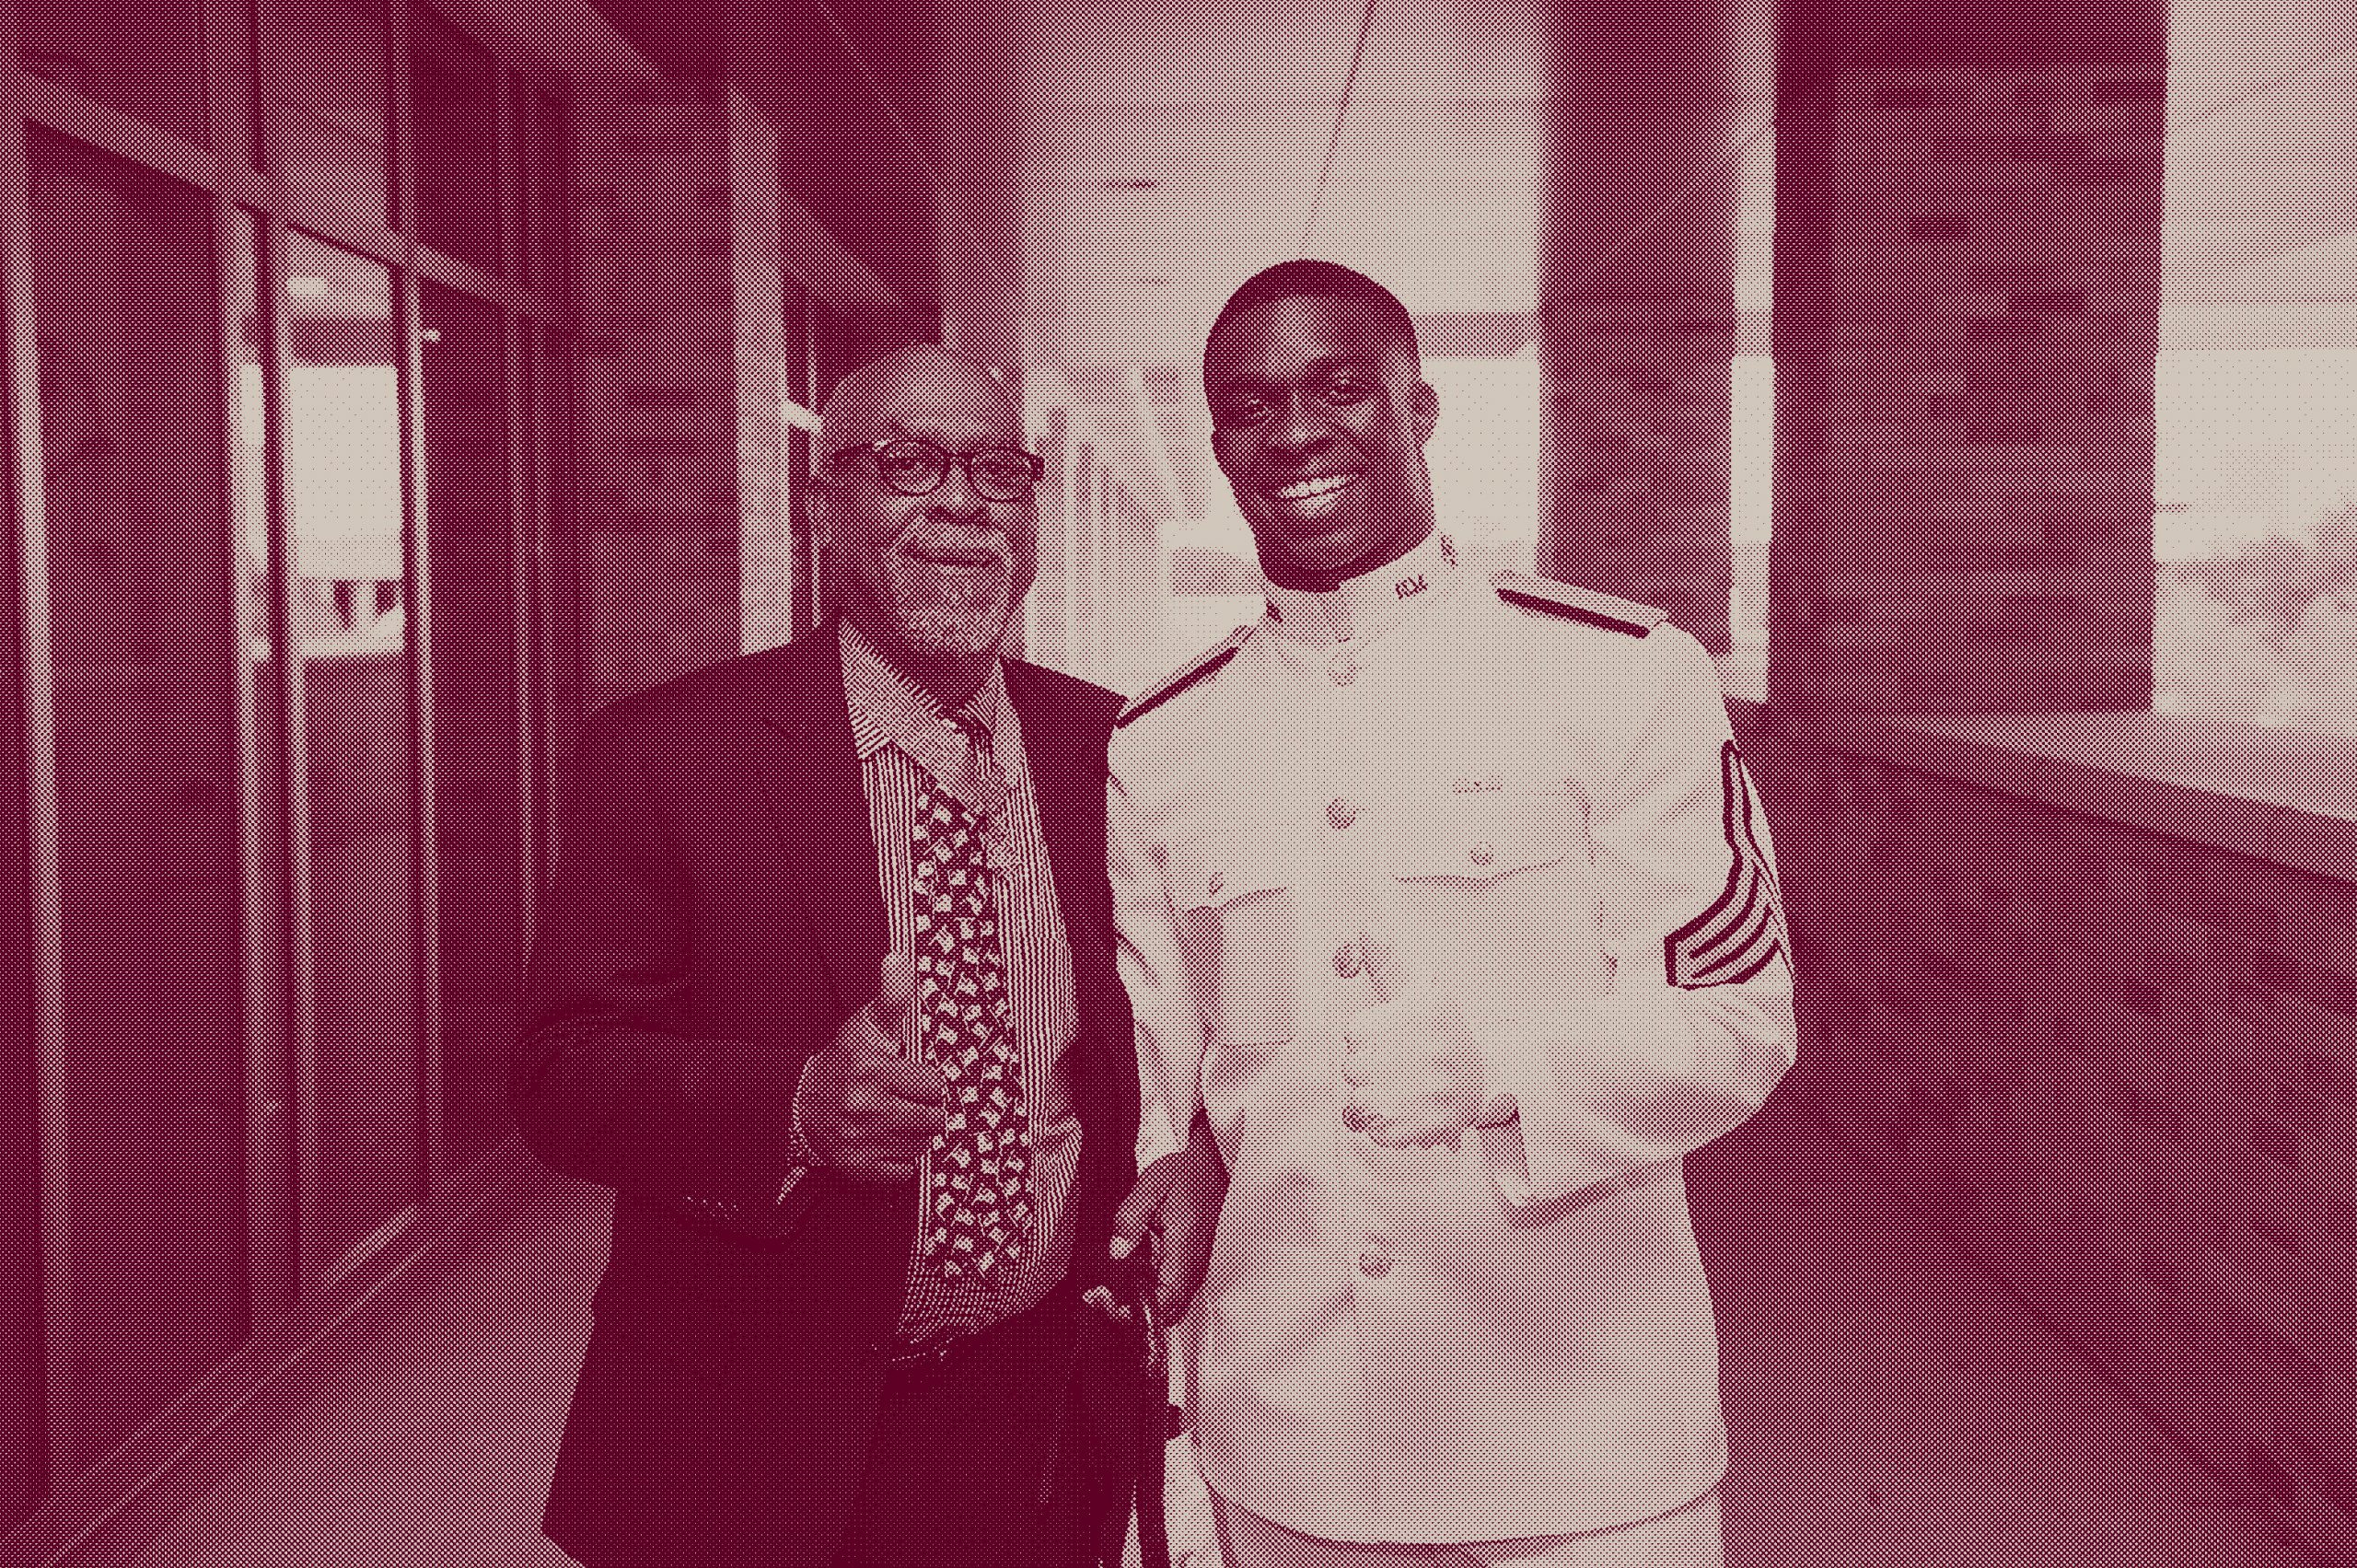 Chris Powell holds up a Gig 'em in his Ross Volunteers uniform as he poses for a photo with Clarence E. Sasser '73, who served as an Army medic in Vietnam and became the eighth Aggie to be awarded the Medal of Honor.